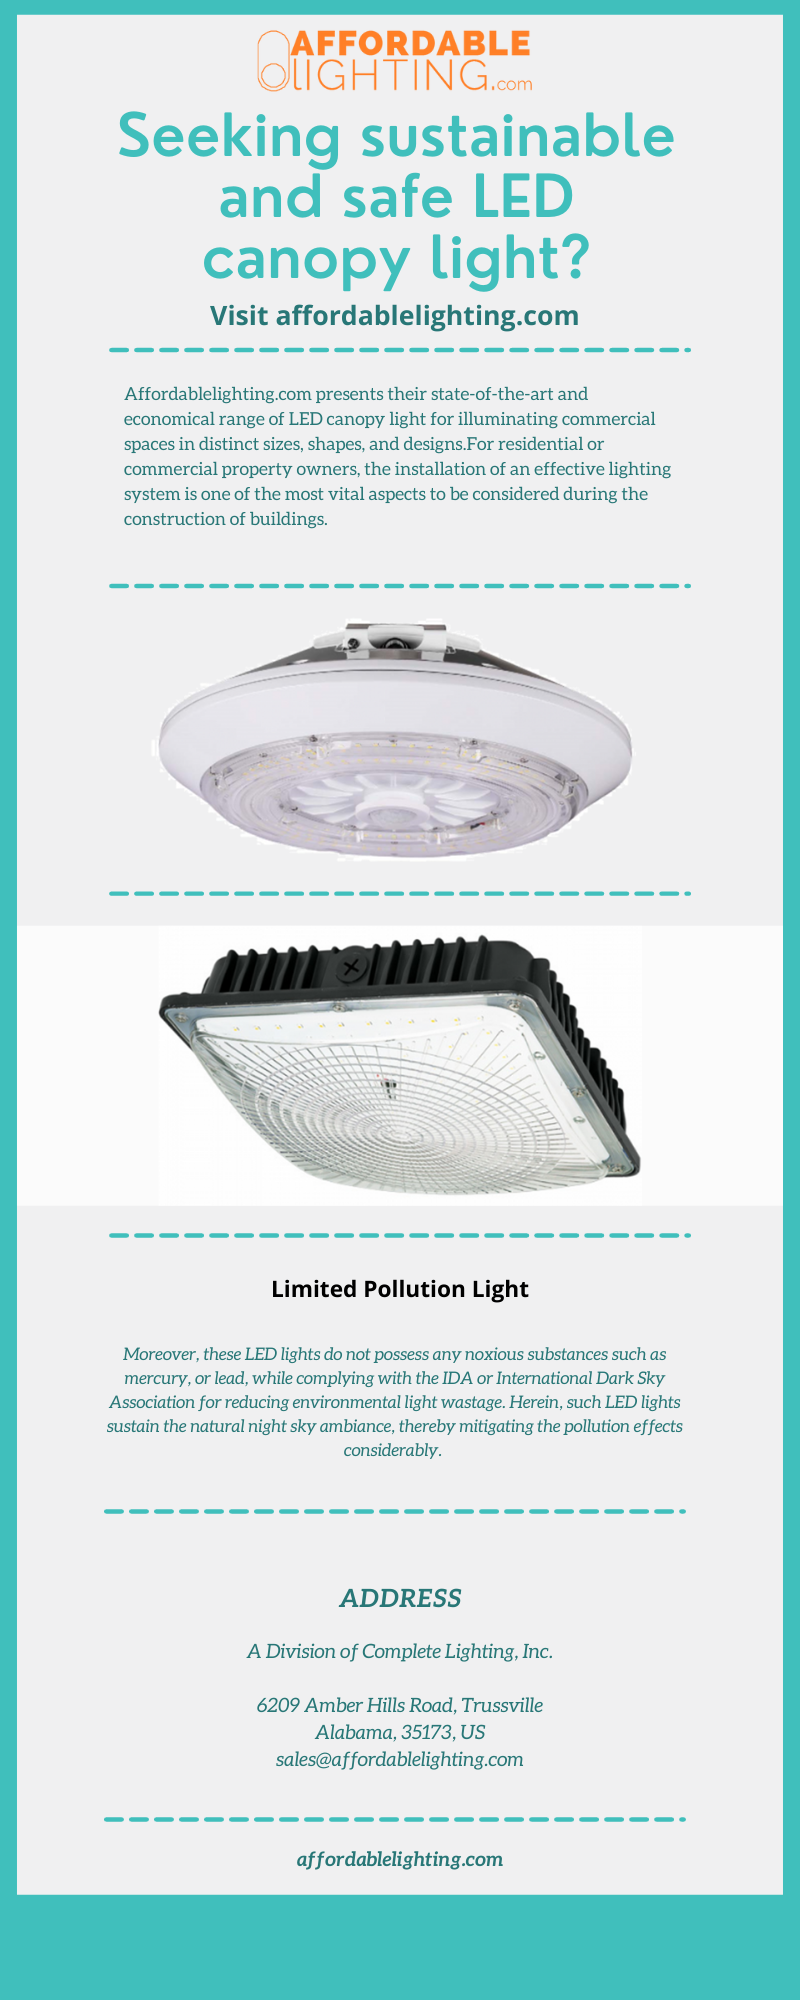 LED canopy light.png  by AffordableLighting